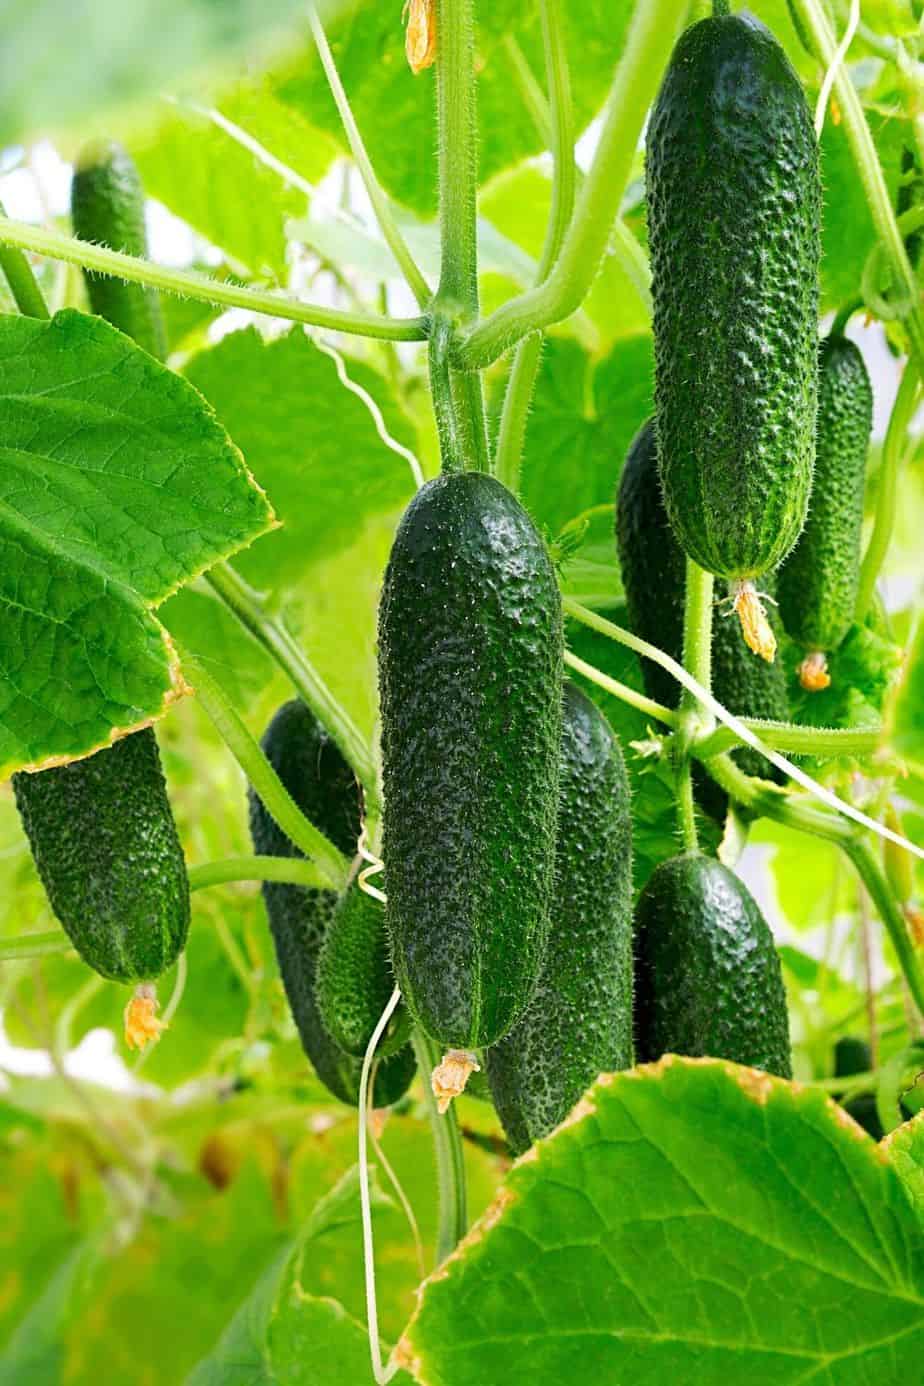 Cucumbers are highly-nutritious plants that you can easily grow on a south-facing balcony